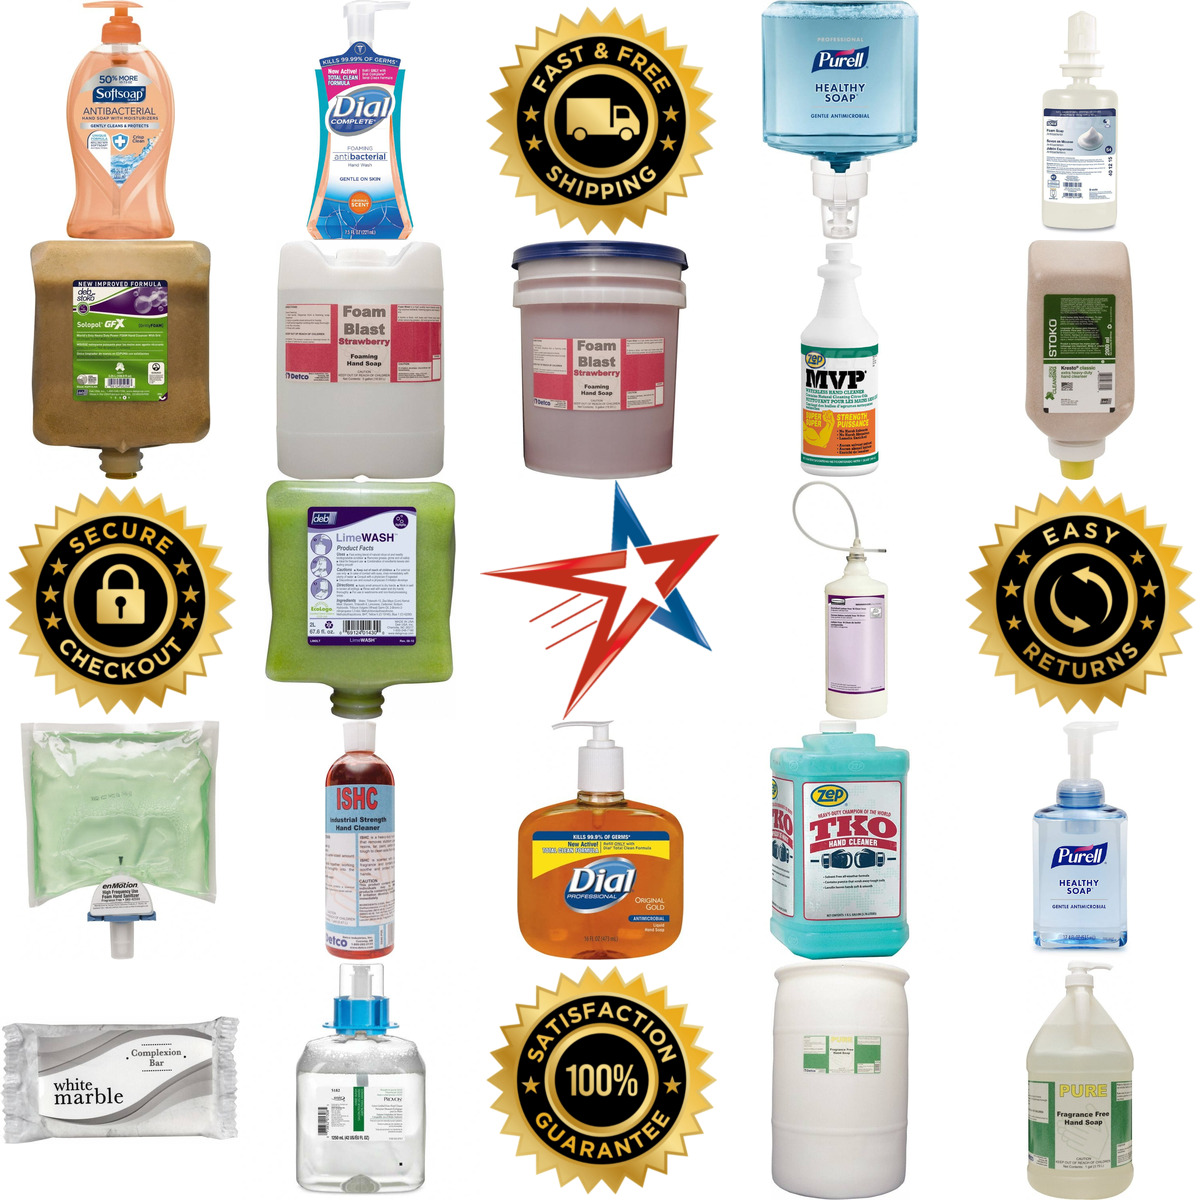 A selection of Hand Cleaners and Soap products on GoVets